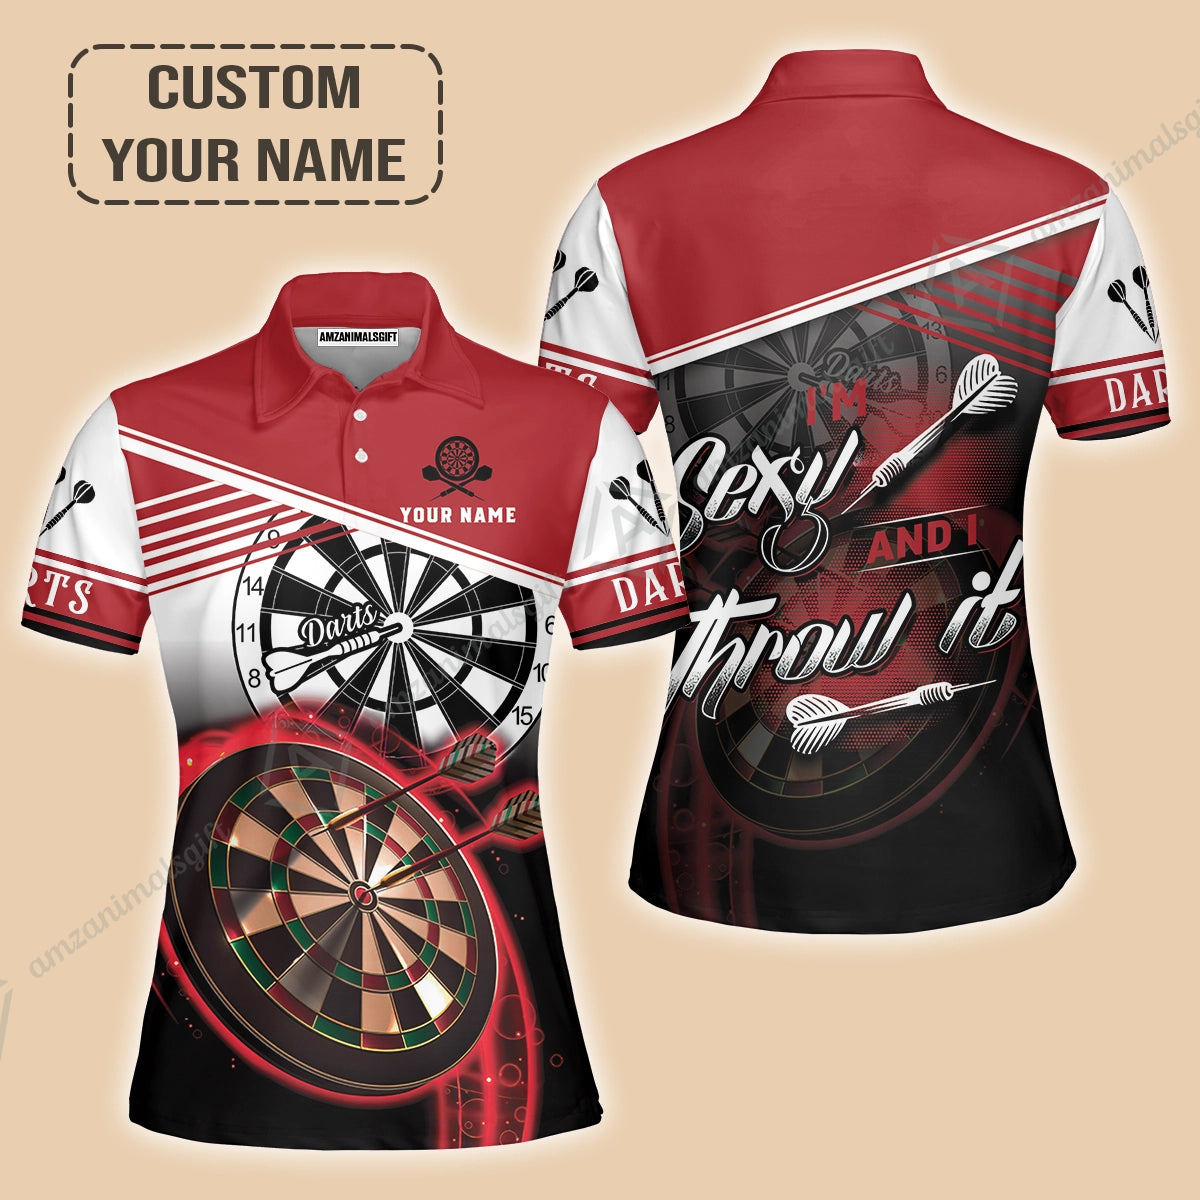 Personalized Darts Women Polo Shirt, Darts Red Color Custom Polo Shirt I'm Sexy And I Throw It, Outfits For Darts Players, Darts Team